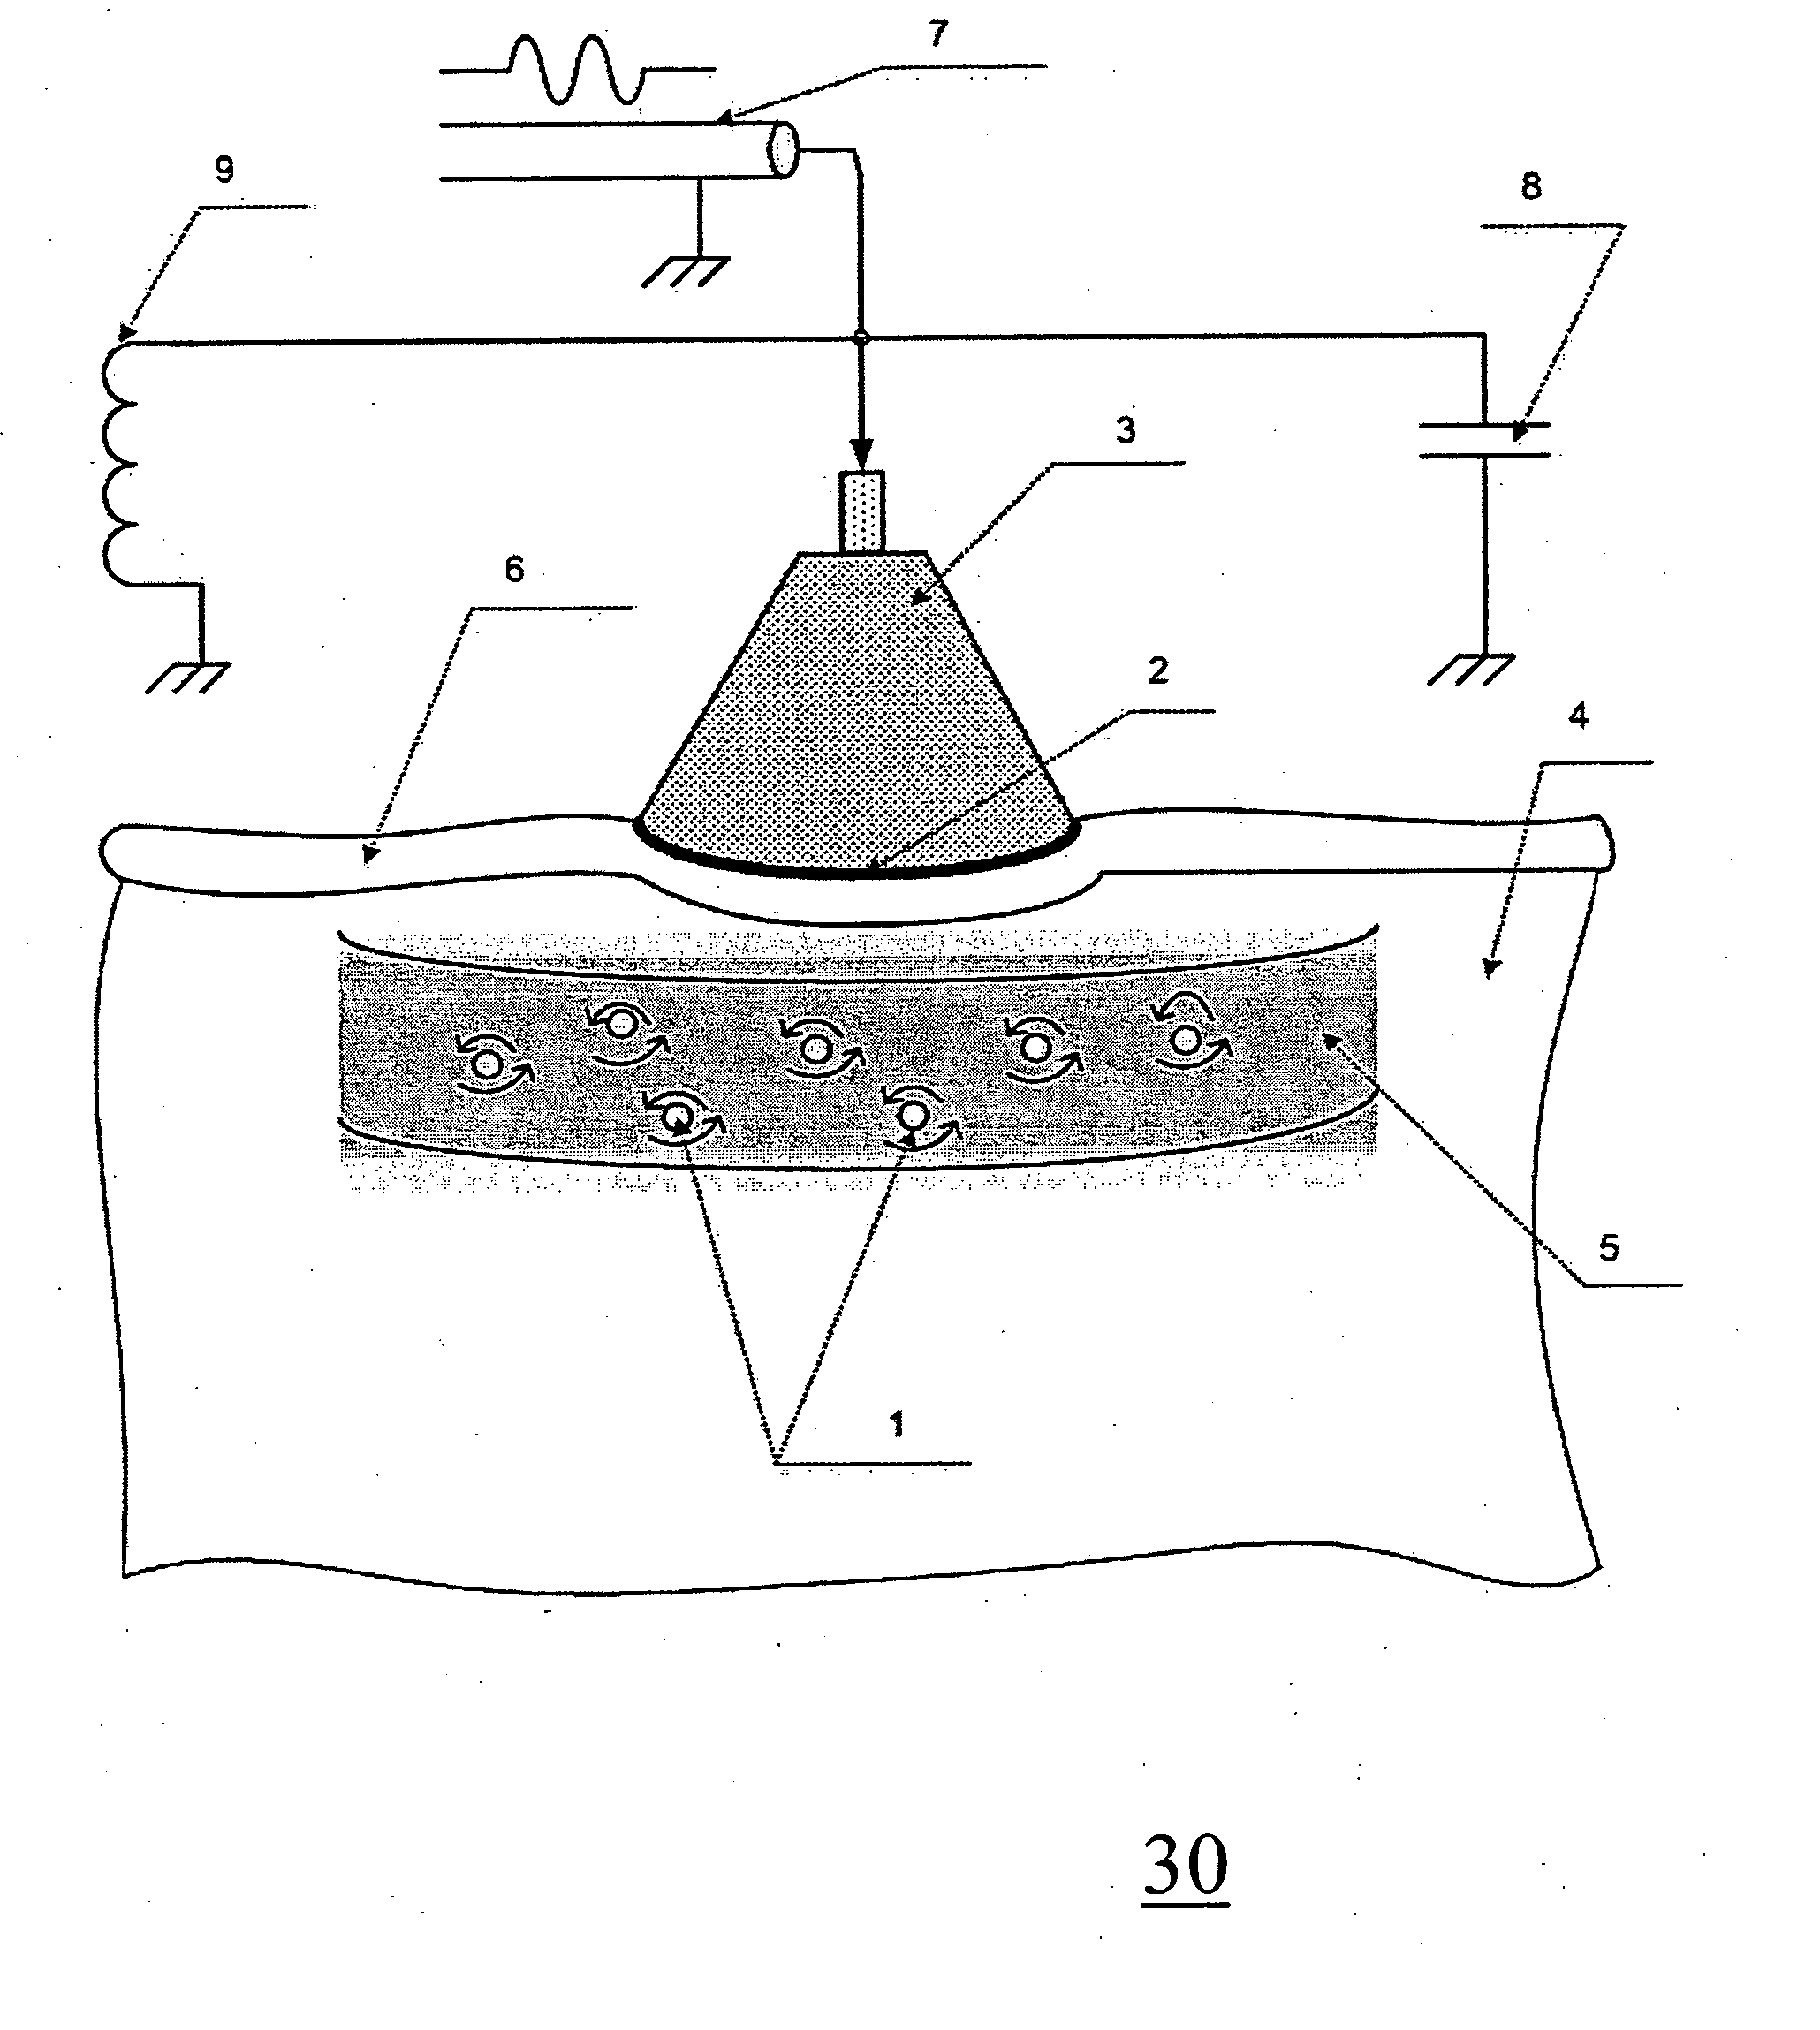 System and method for heating biological tissue via rf energy